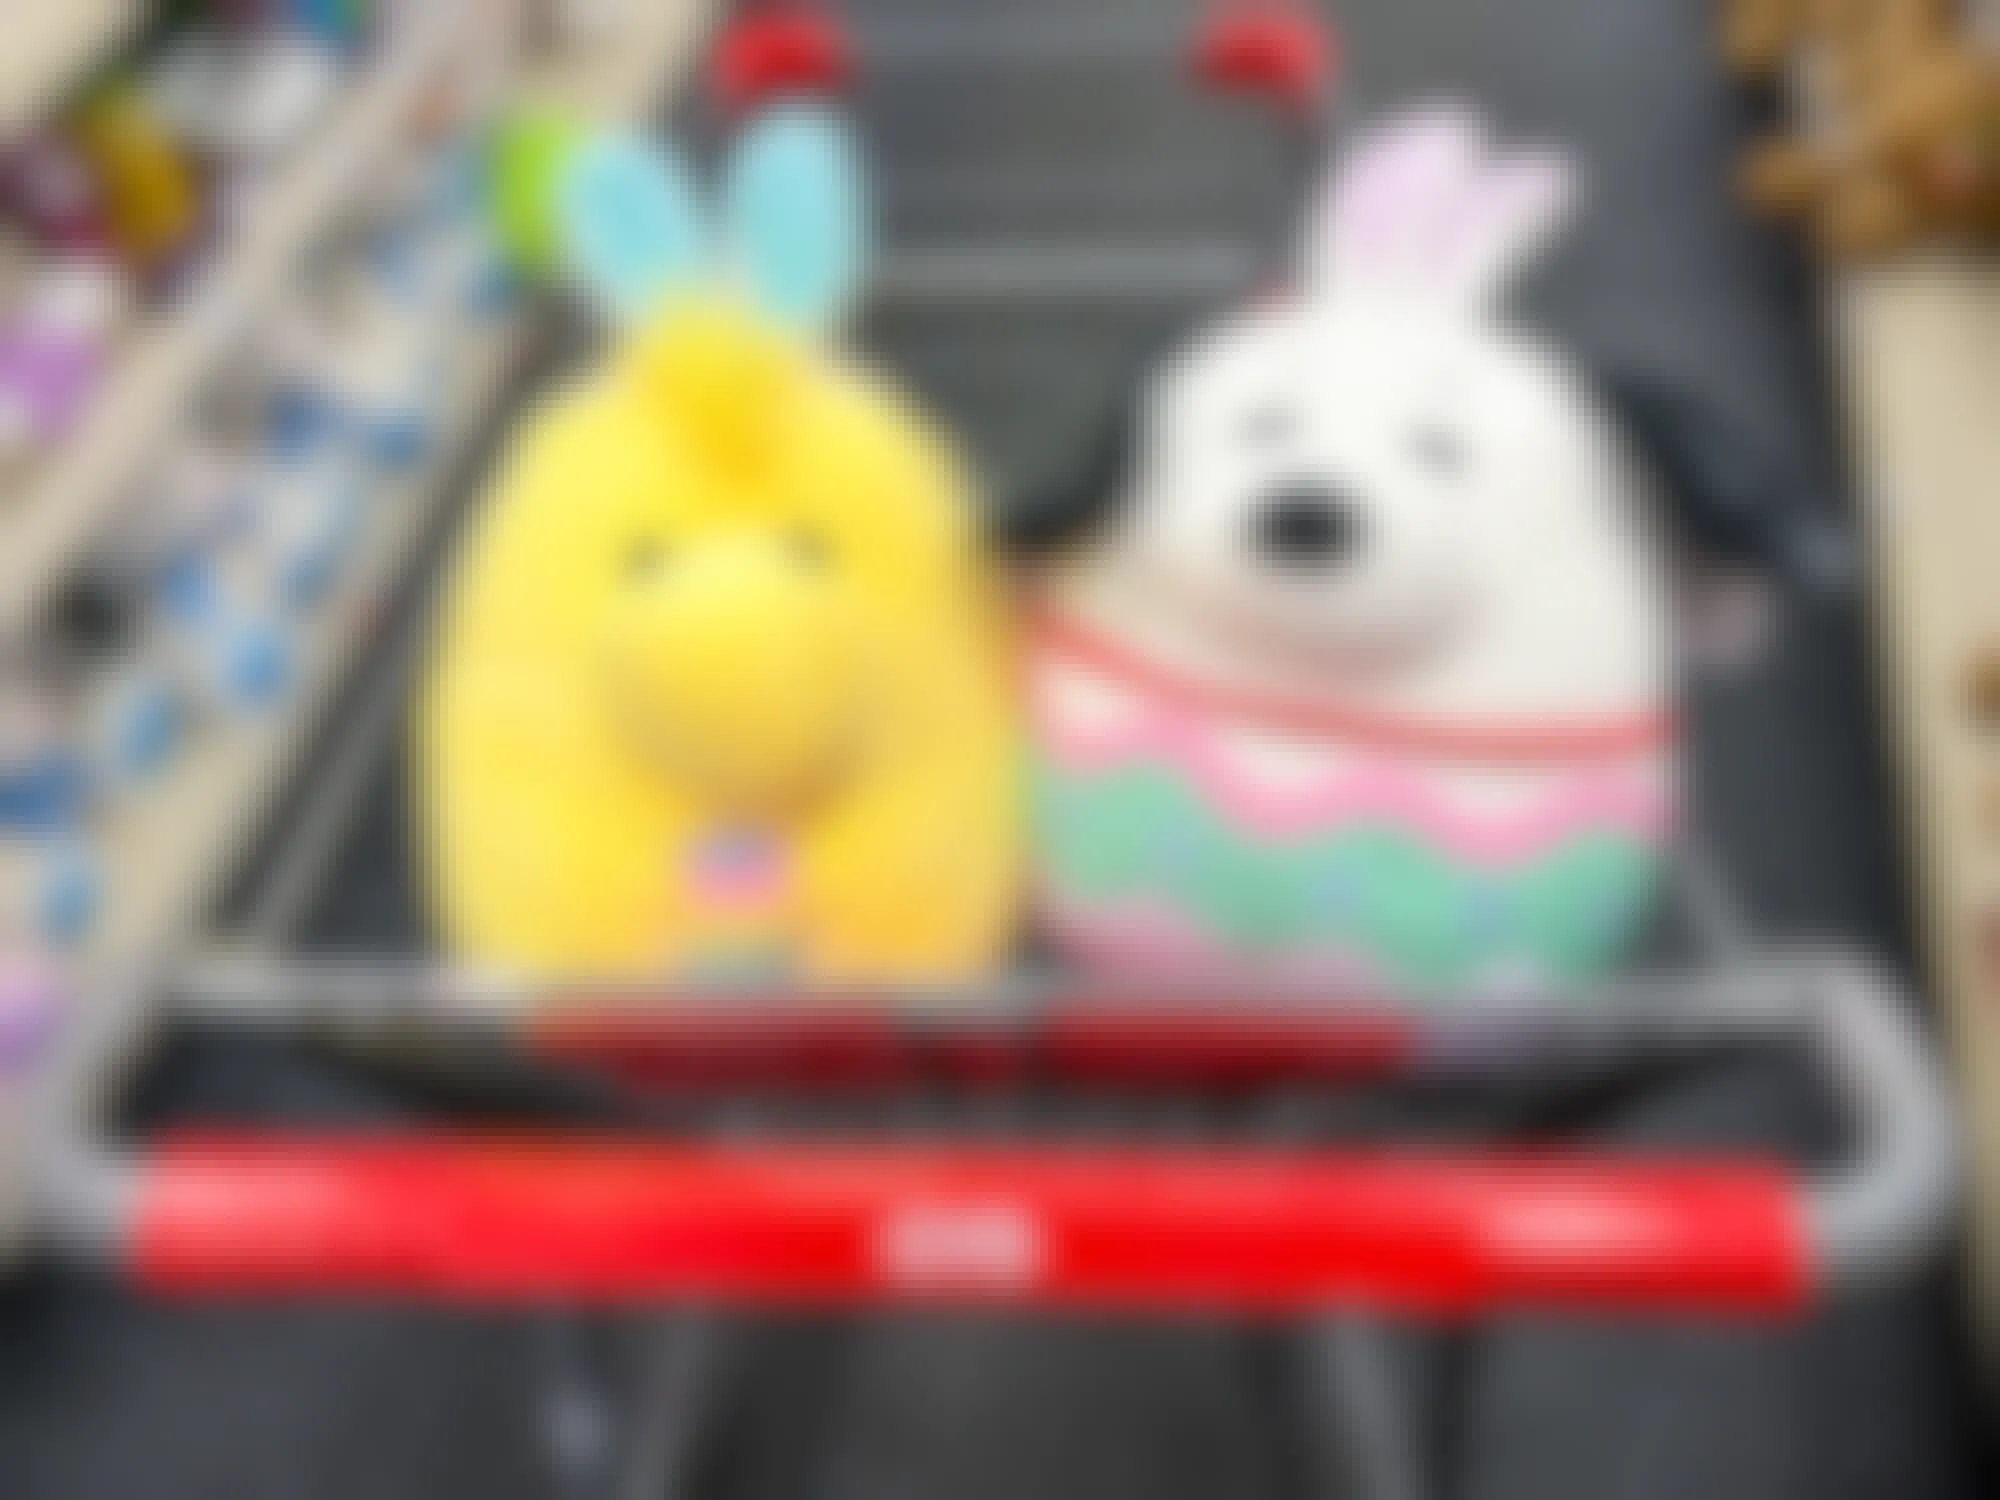 A Woodstock and Snoopy Easter Squishmallow sitting together in a CVS cart